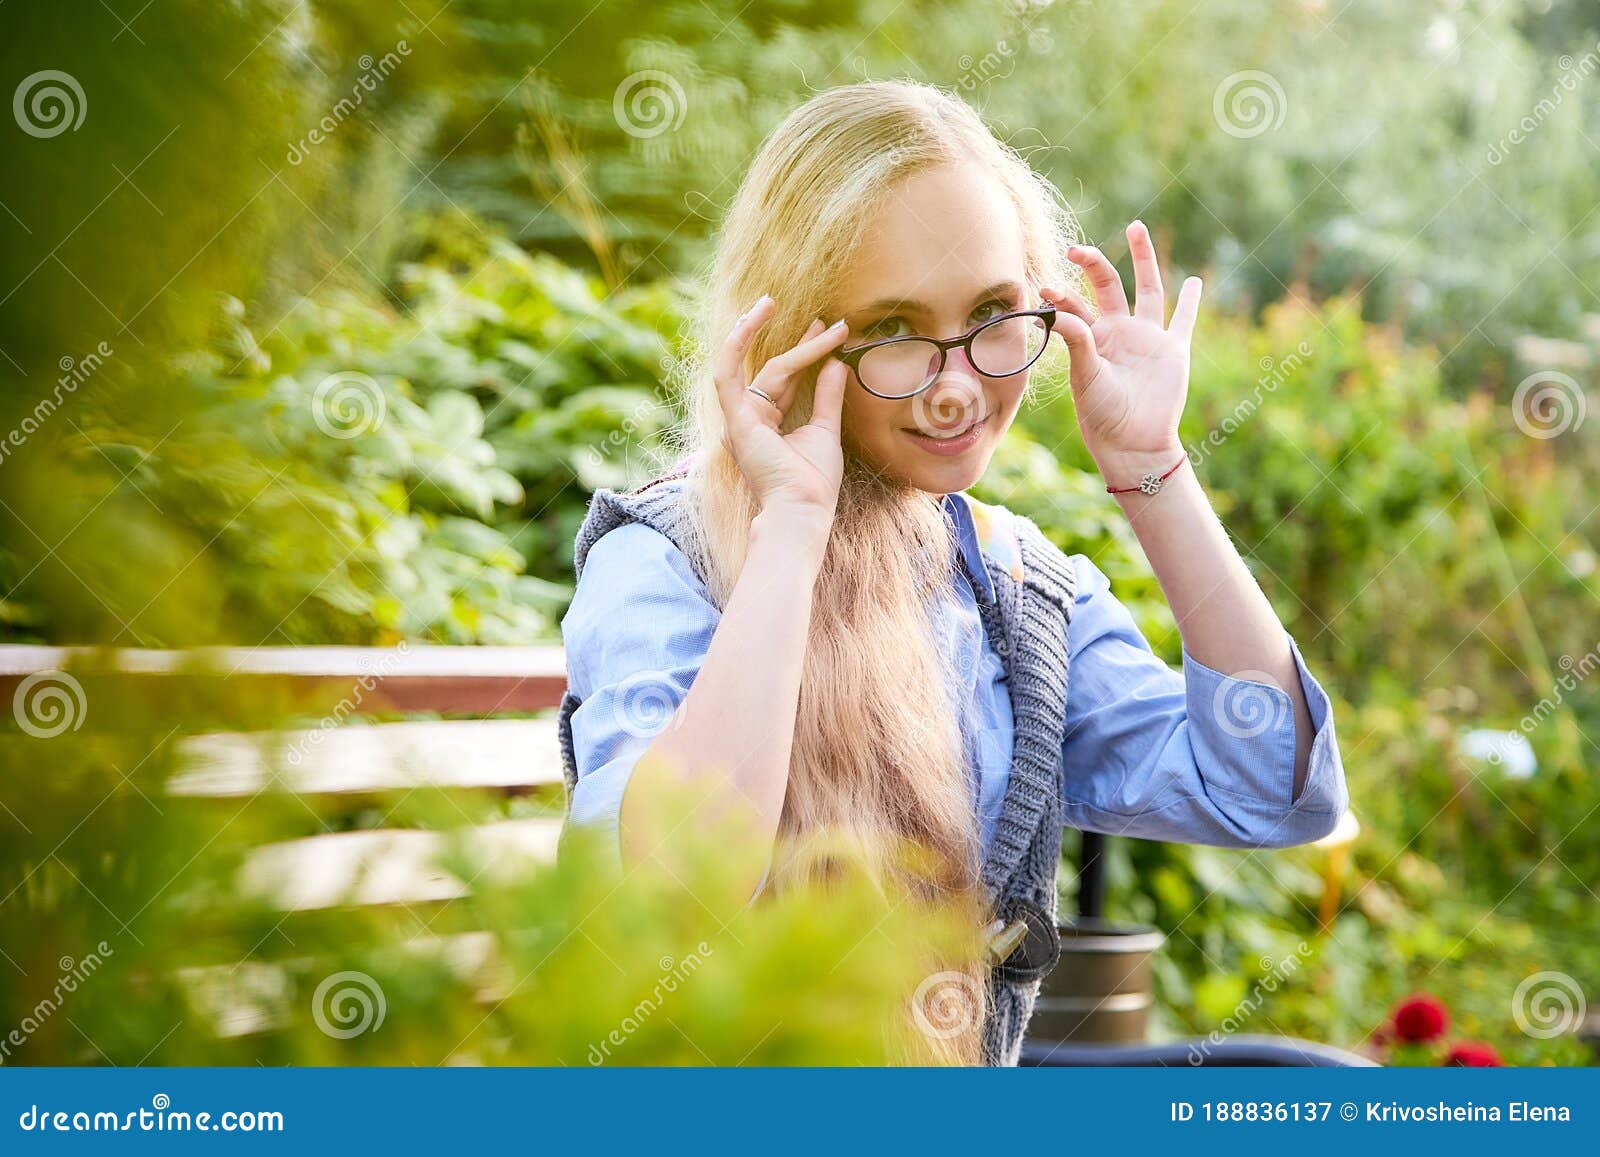 Pretty Teenage Girl 14 16 Year Old With Curly Long Blonde Hair And In Glasses In The Green Park 